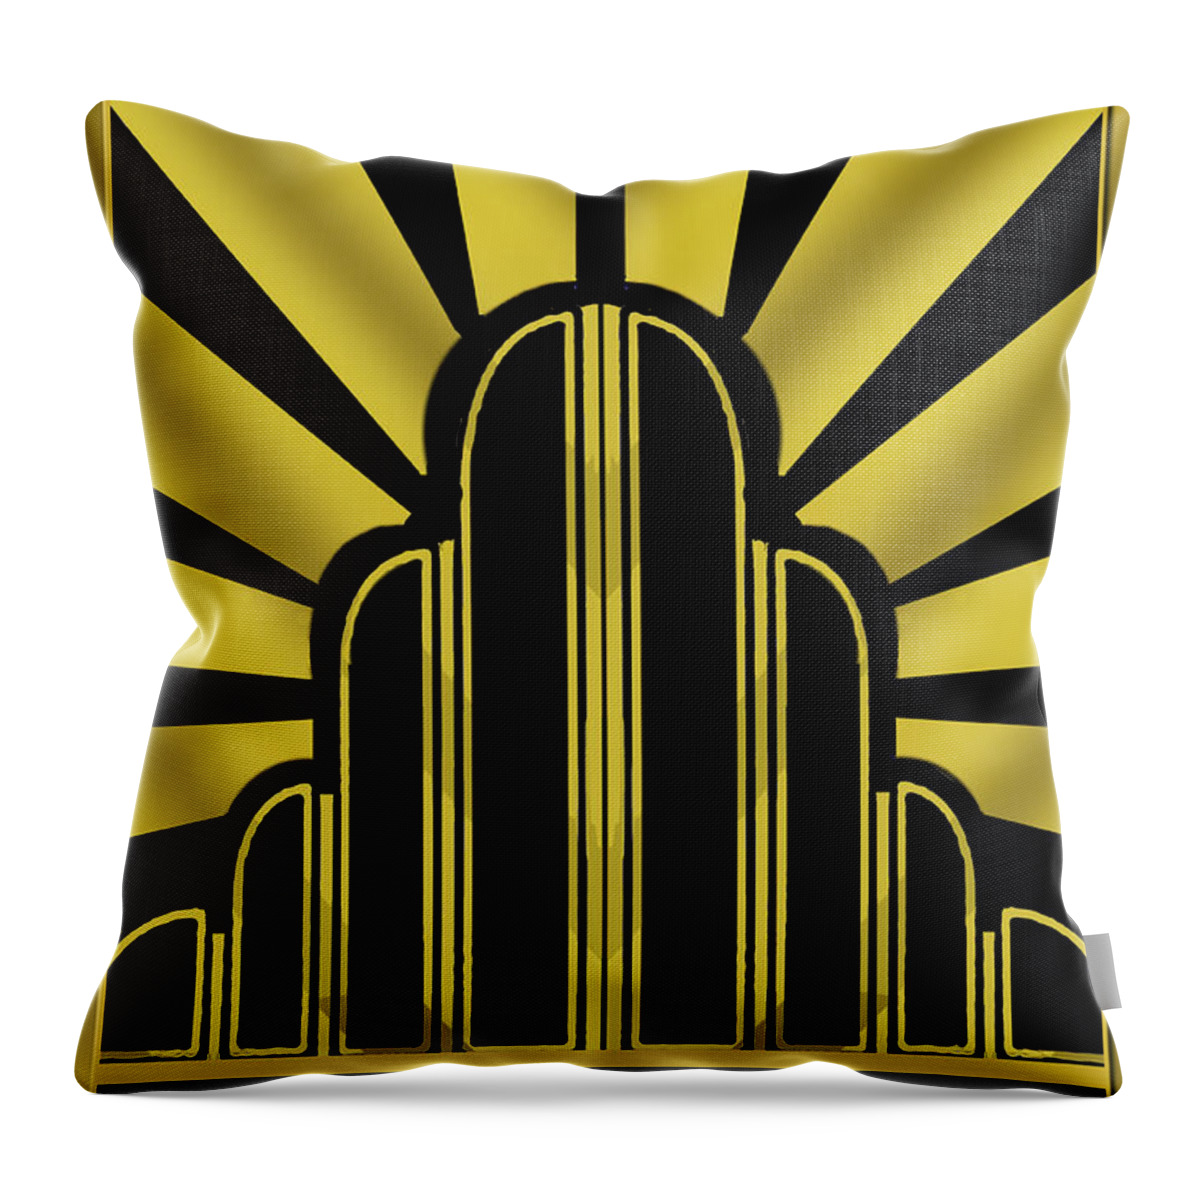 Art Deco Poster - Title Throw Pillow featuring the digital art Art Deco Poster - Title by Chuck Staley